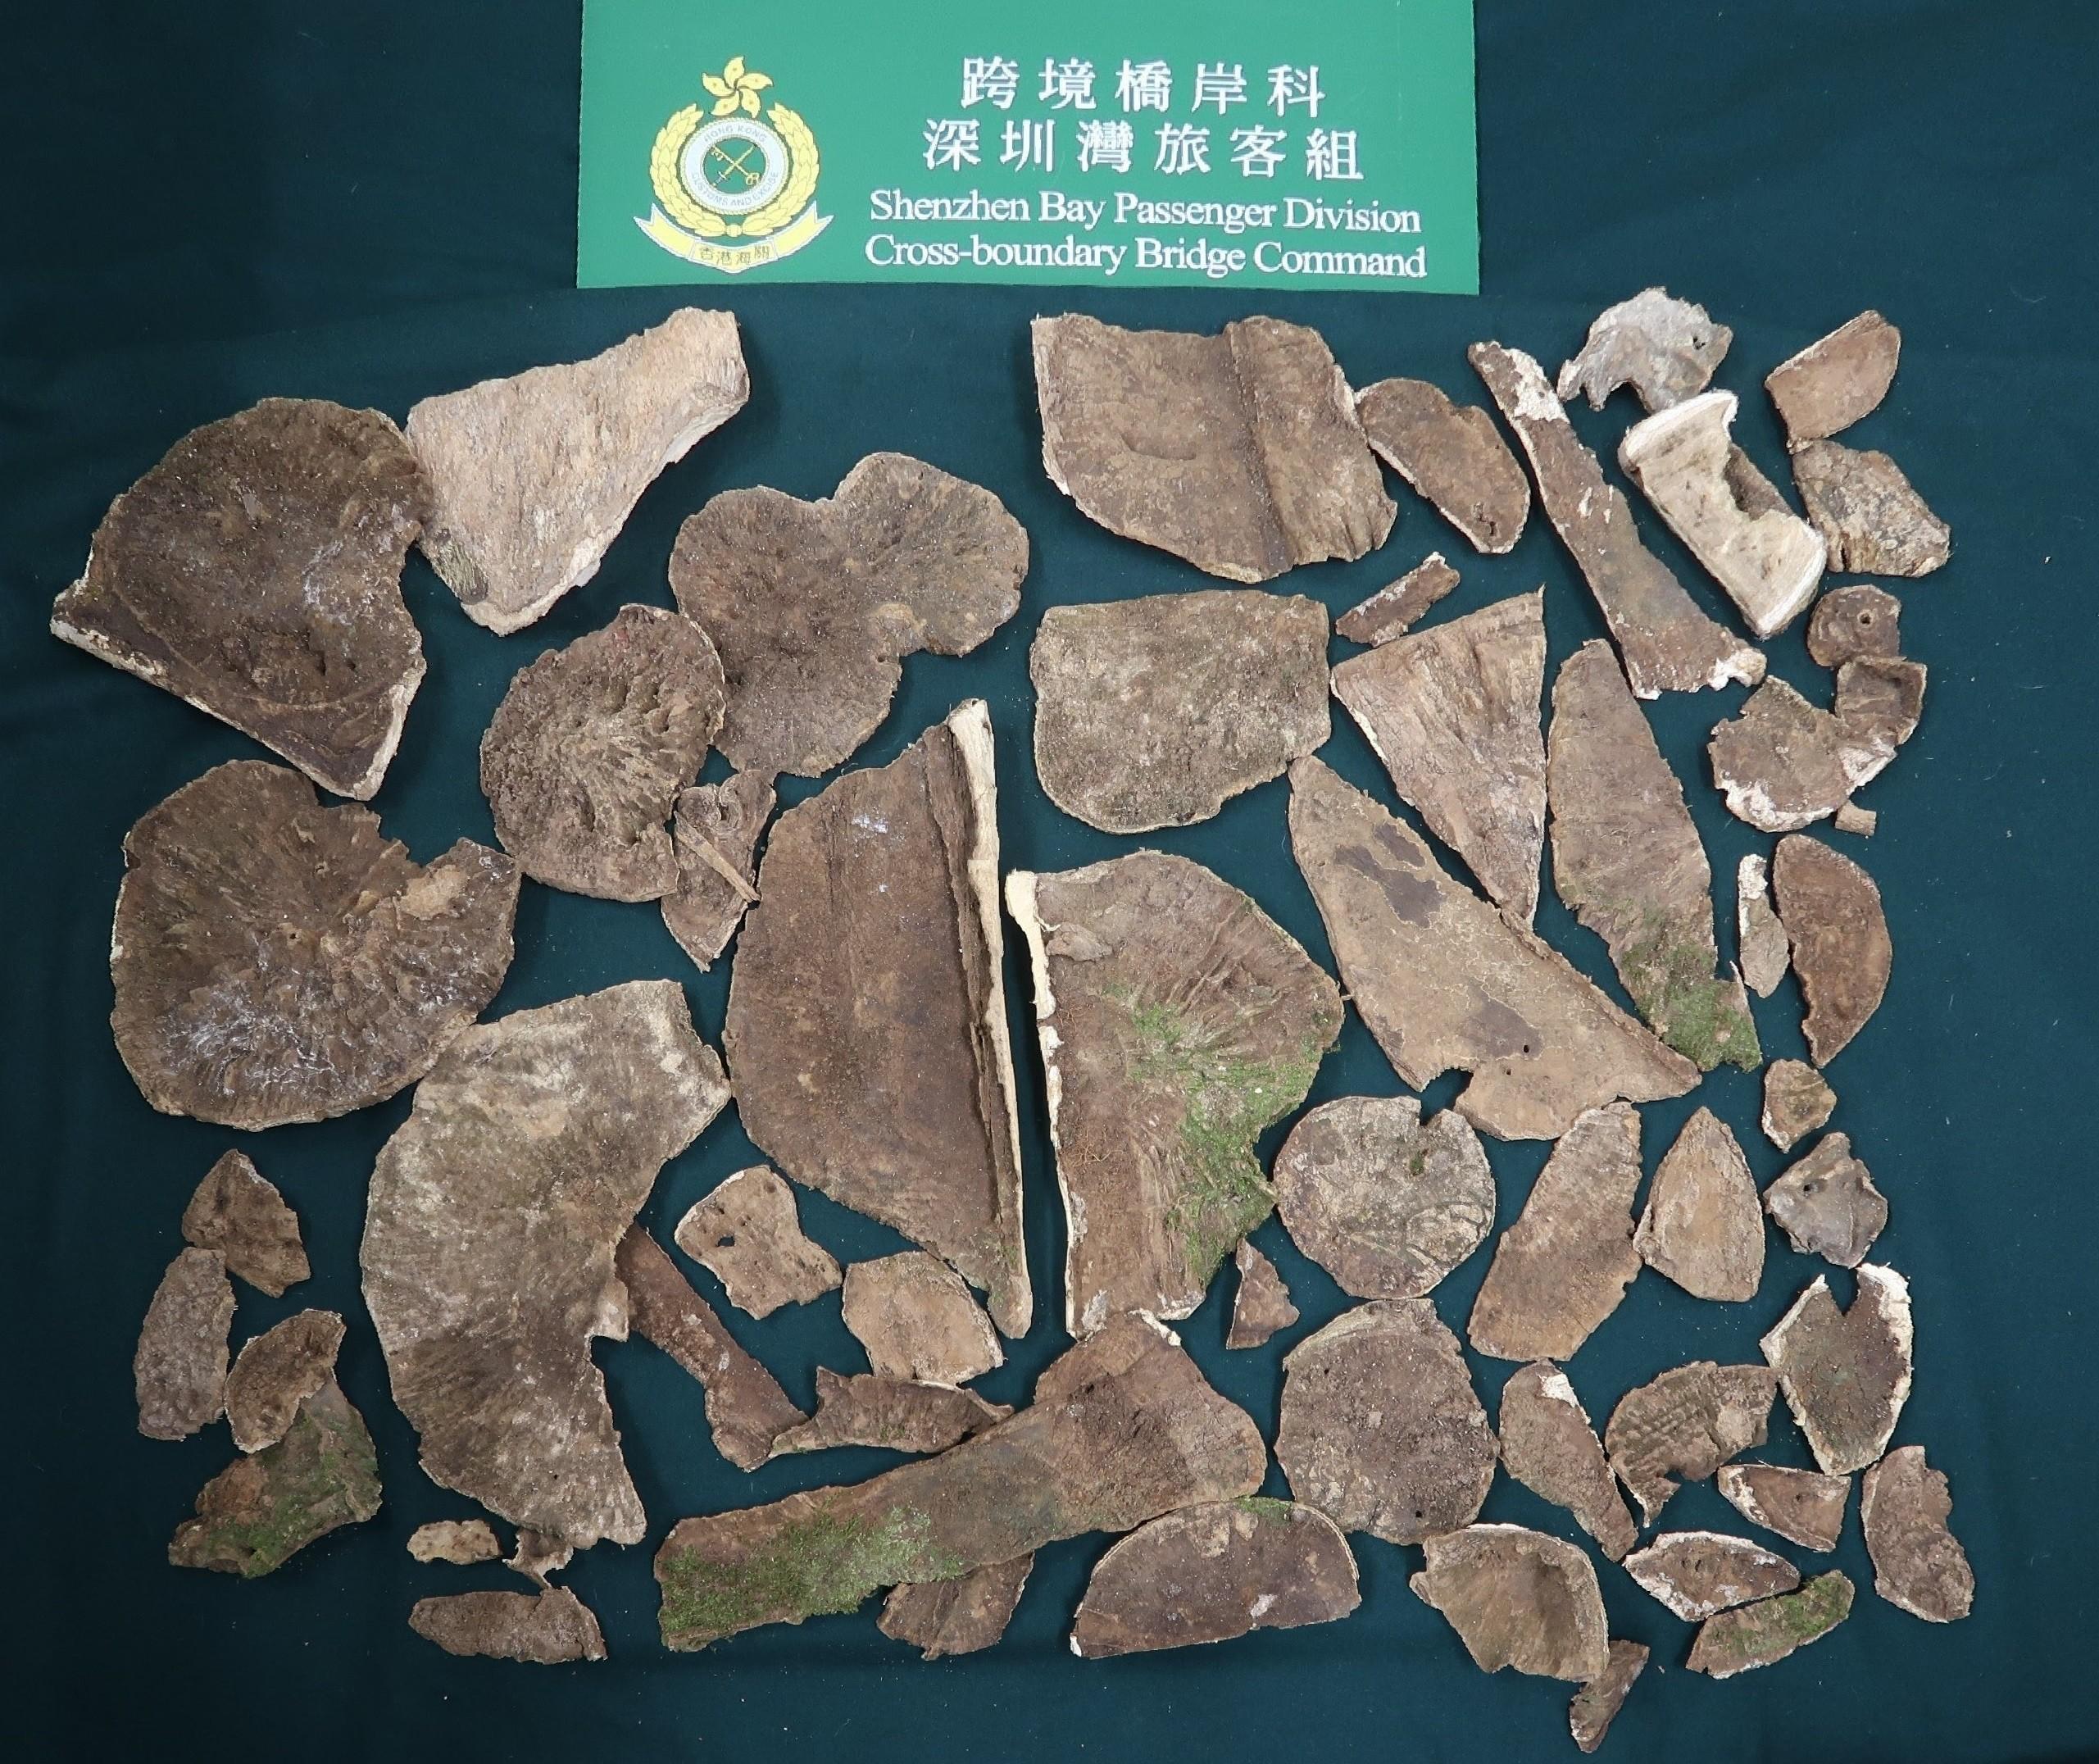 Hong Kong Customs detected two smuggling cases of suspected scheduled agarwood involving outbound passengers at the Shenzhen Bay Control Point, and seized a total of about 13.2 kilograms of suspected scheduled agarwood with an estimated market value of about $1.06 million over the past two days (March 12 and 13). Photo shows the suspected scheduled agarwood, with a total weight of about 4.2 kg, seized by Customs officers on March 12.